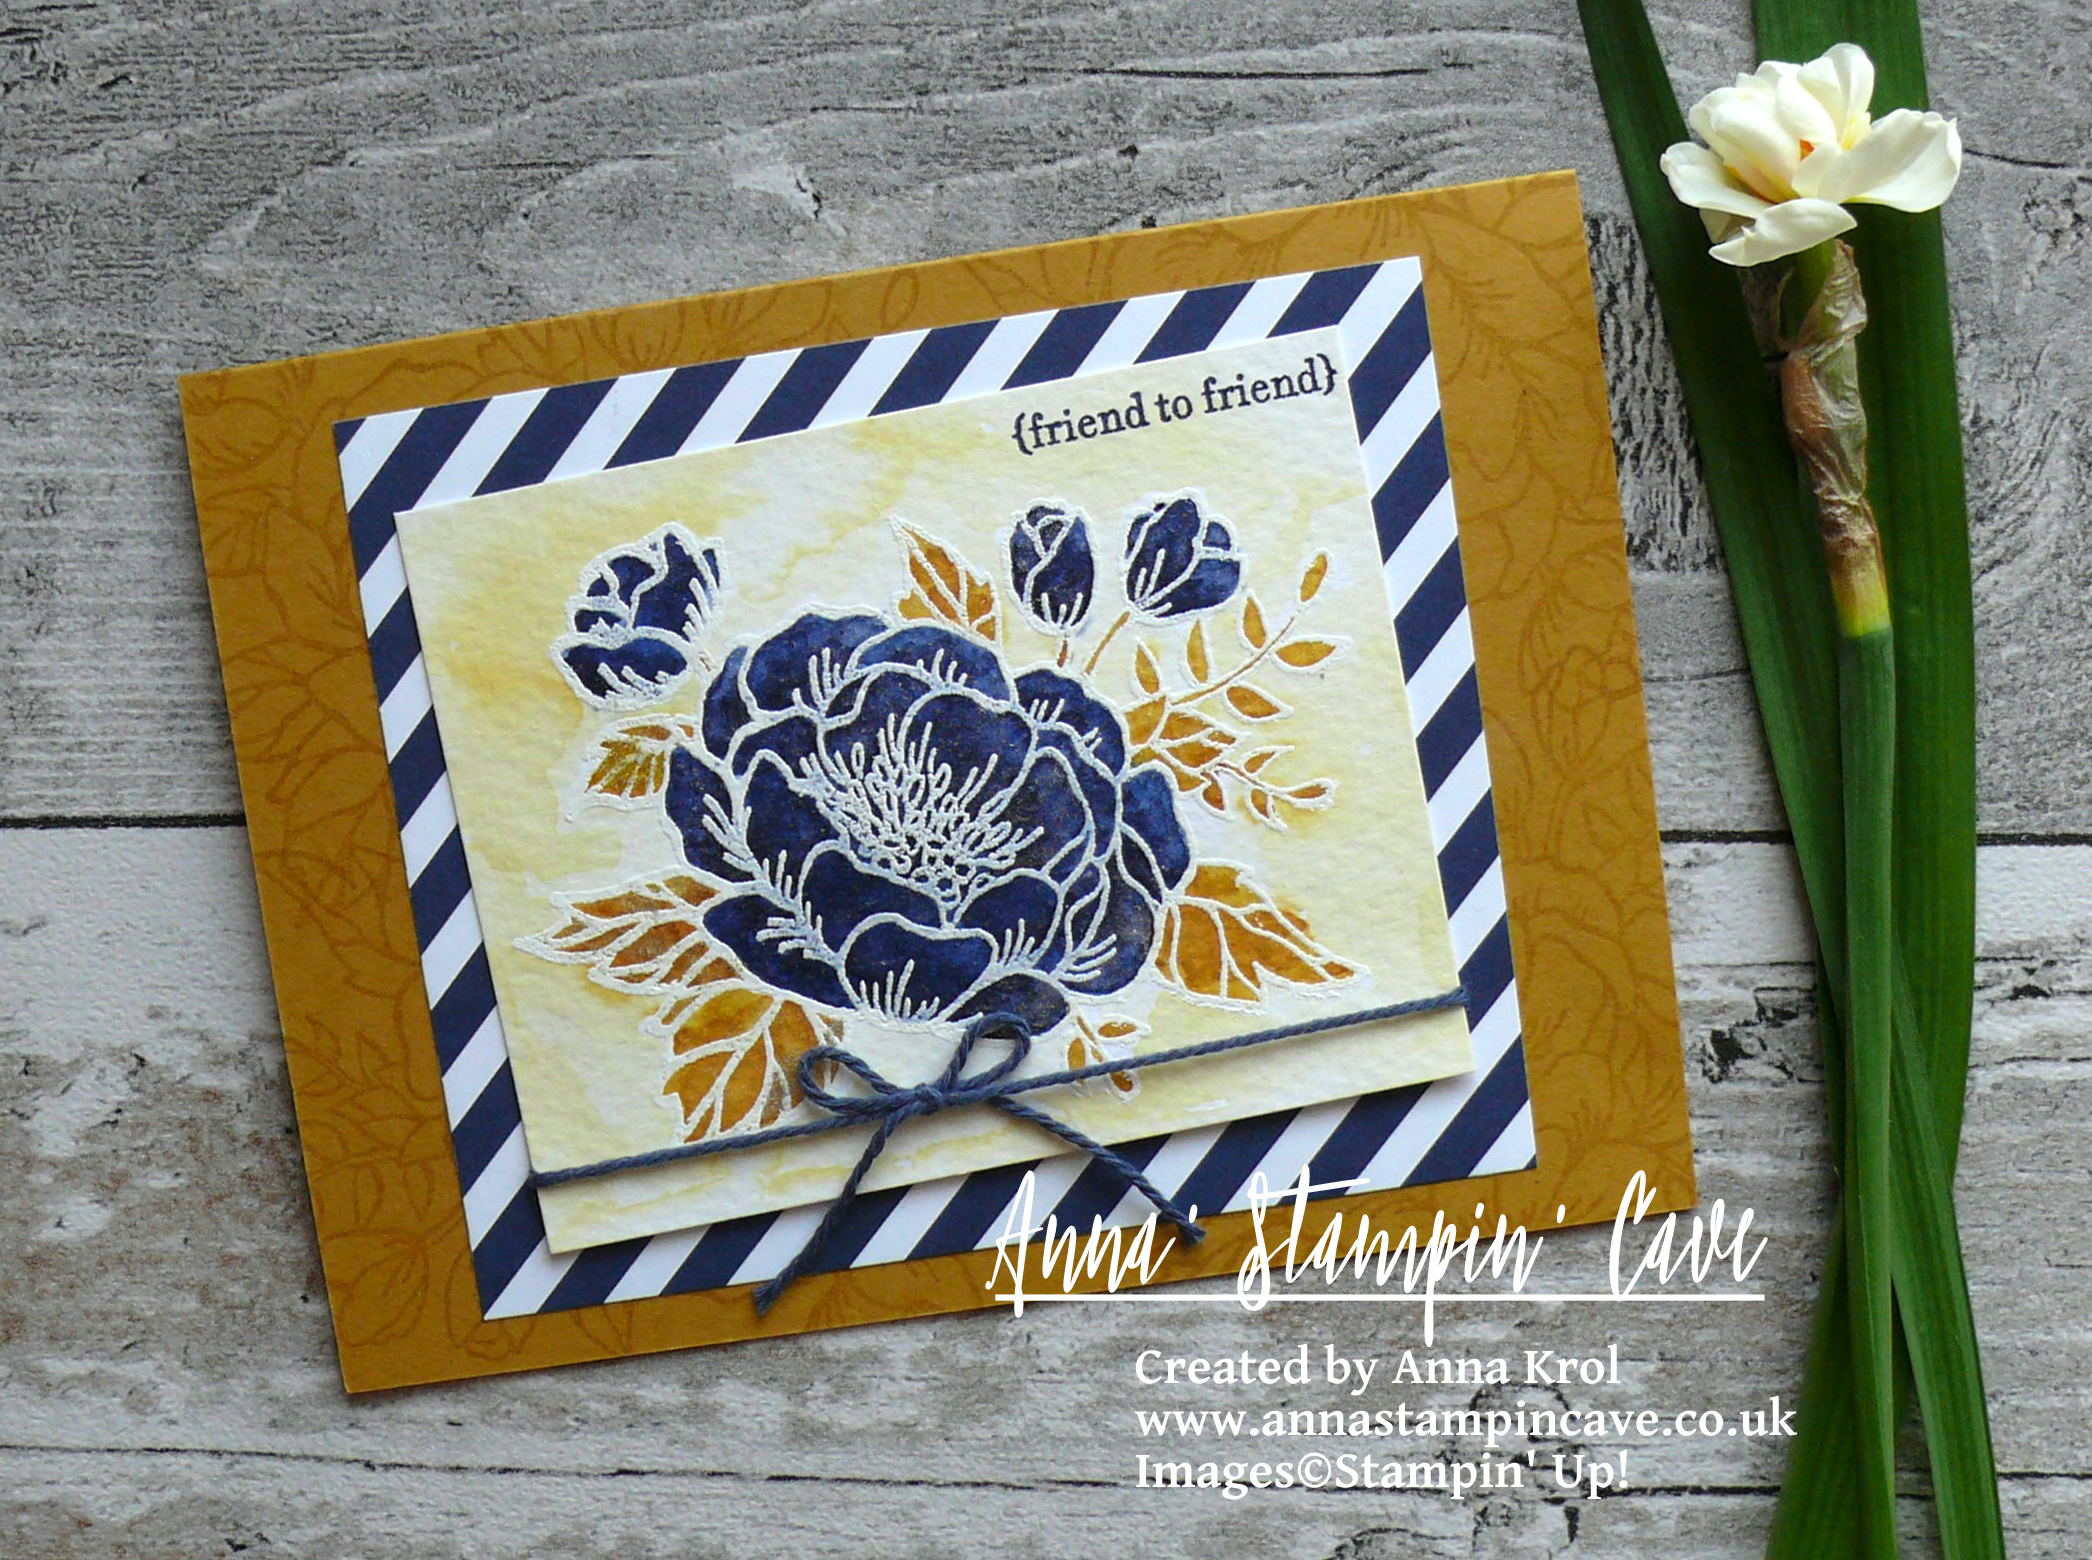 Anna' Stampin' Cave_Stampin' Up! Birthday Blooms Stamp Set_Watercolour Card_Delightful Dijon Night Of Navy